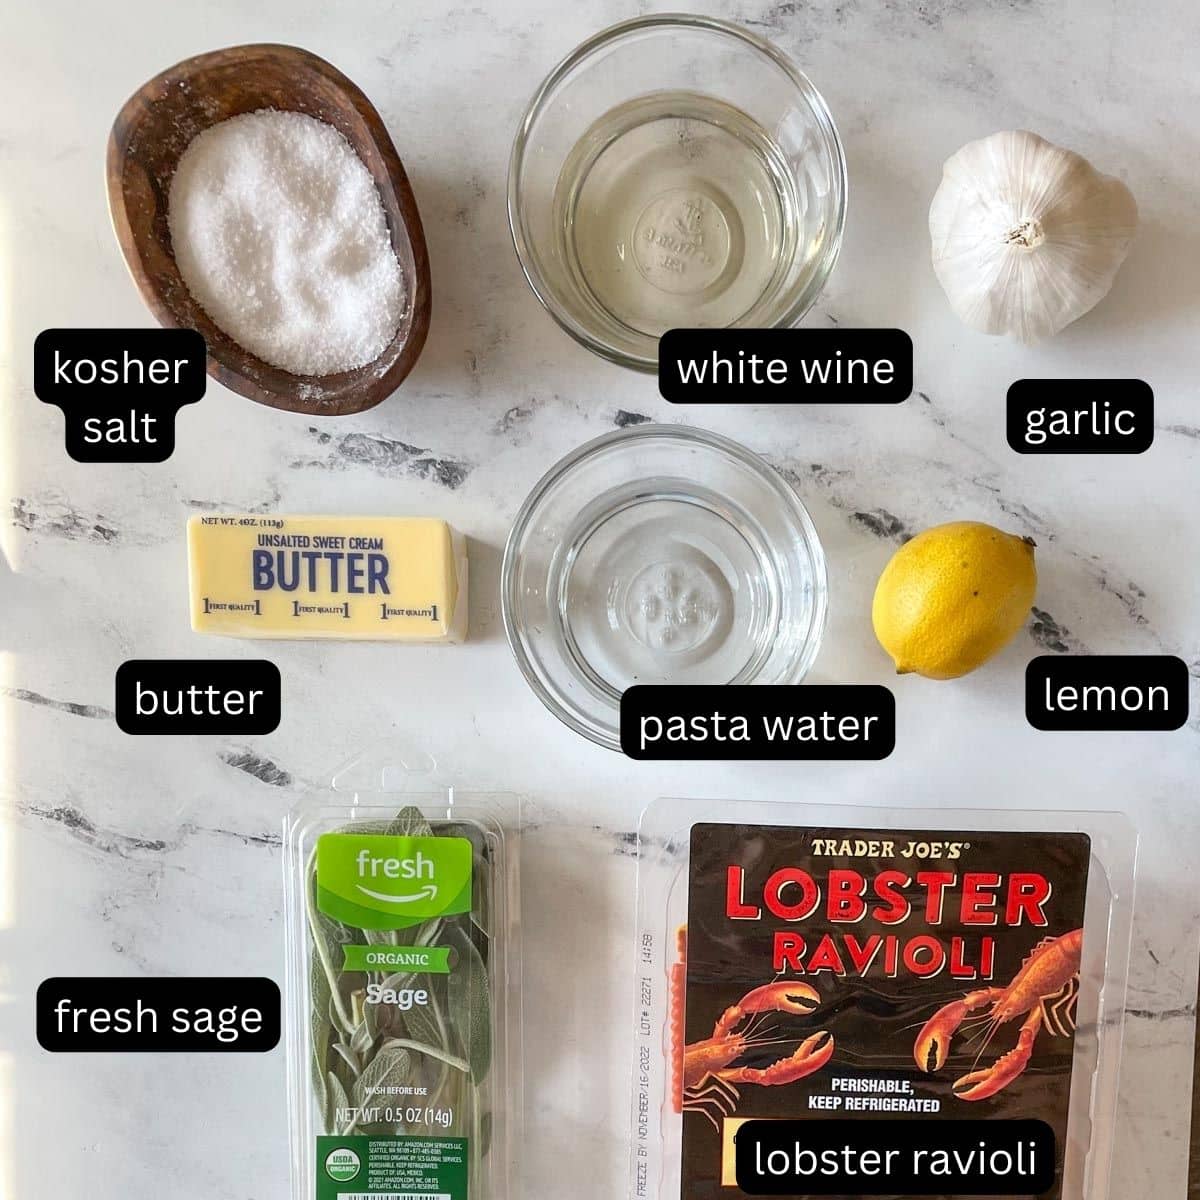 The labeled ingredients for lobster ravioli sauce are shown on a white marble counter.